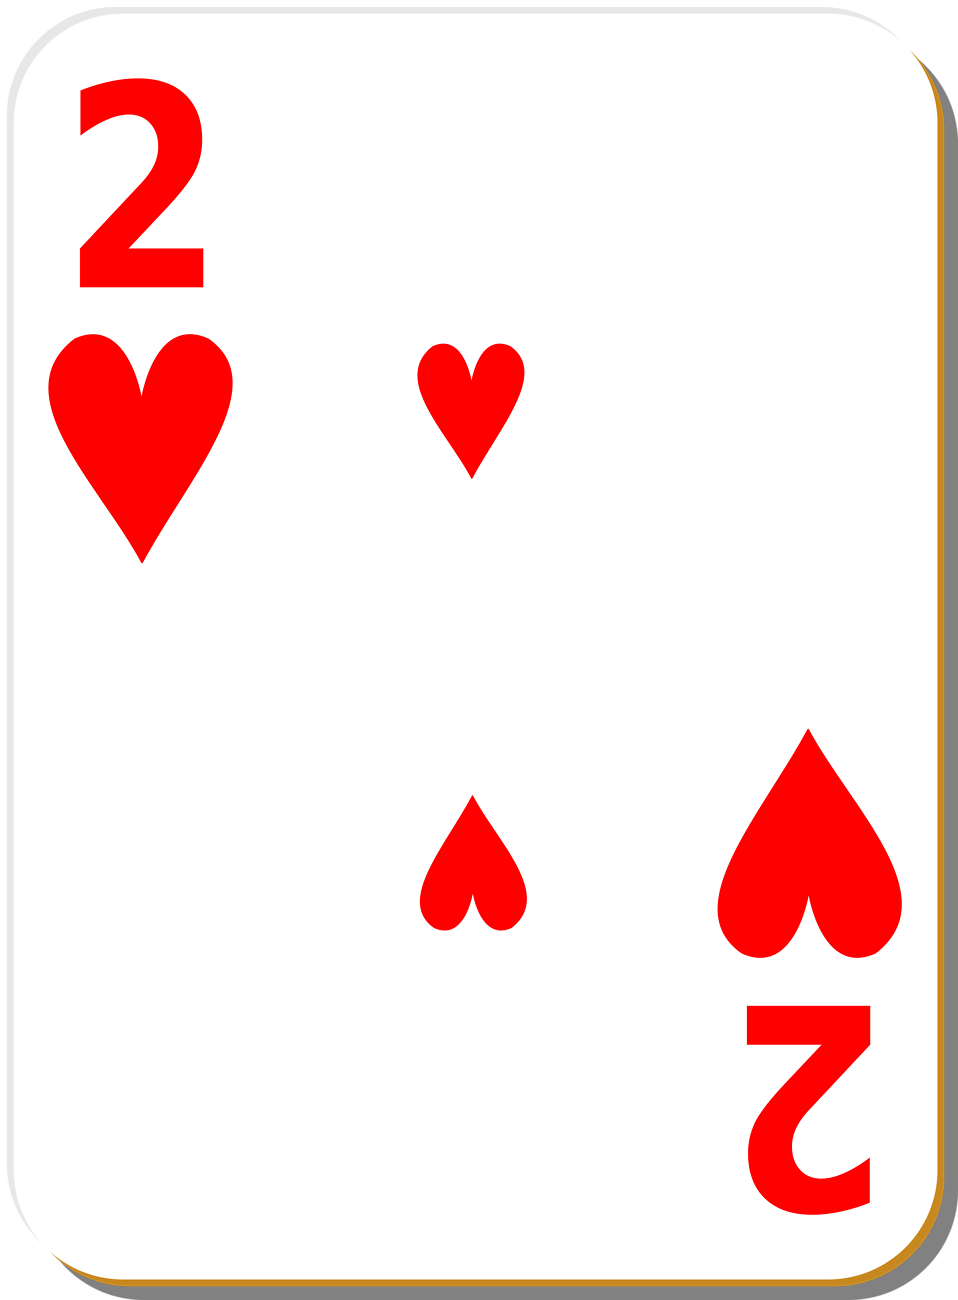 Playing Card | Free Stock Photo | Illustration of a Two of Hearts ...